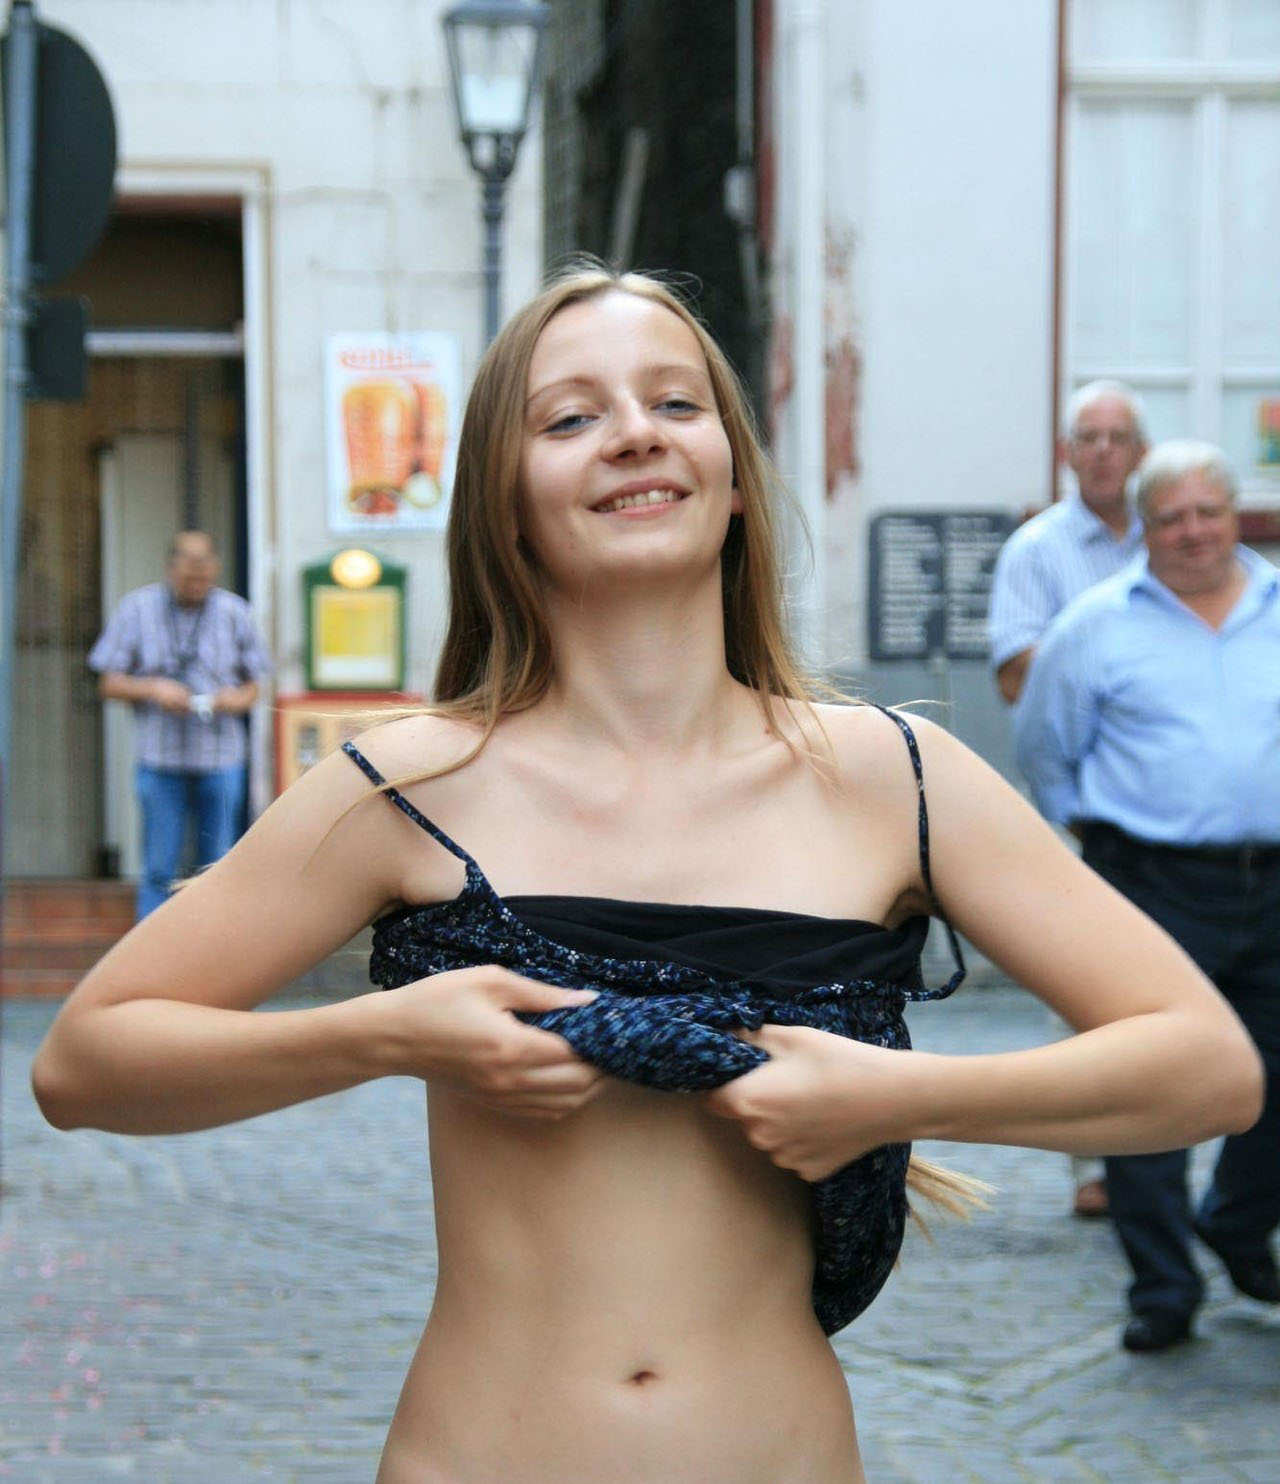 Exhibitionist pornography features performers exposing themselves in public.